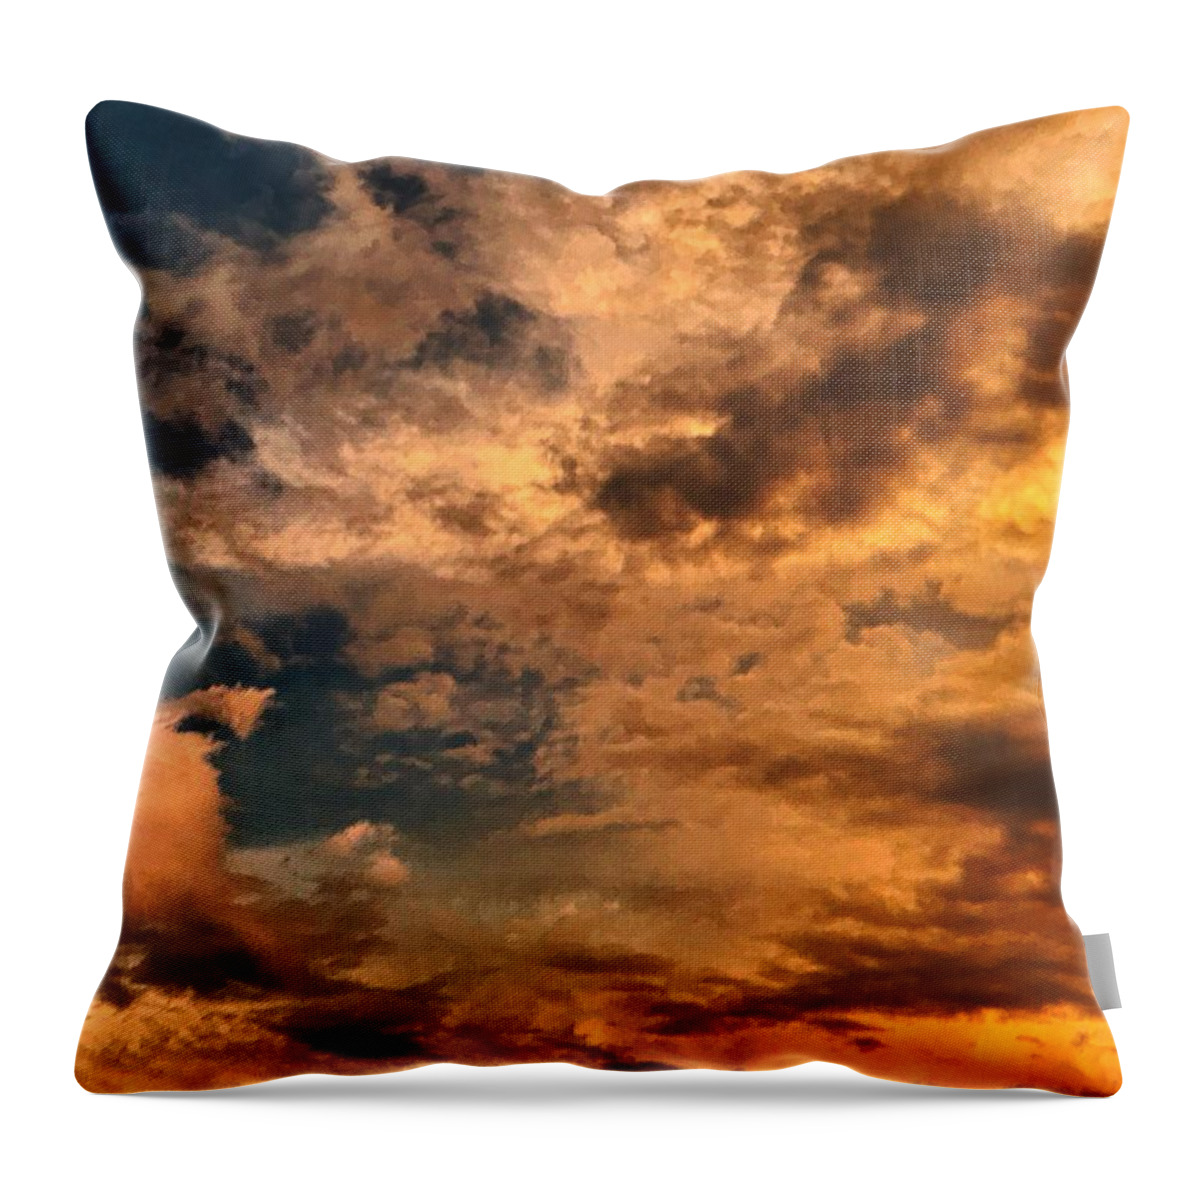  Throw Pillow featuring the photograph Clouds #1 by Stephen Dorton